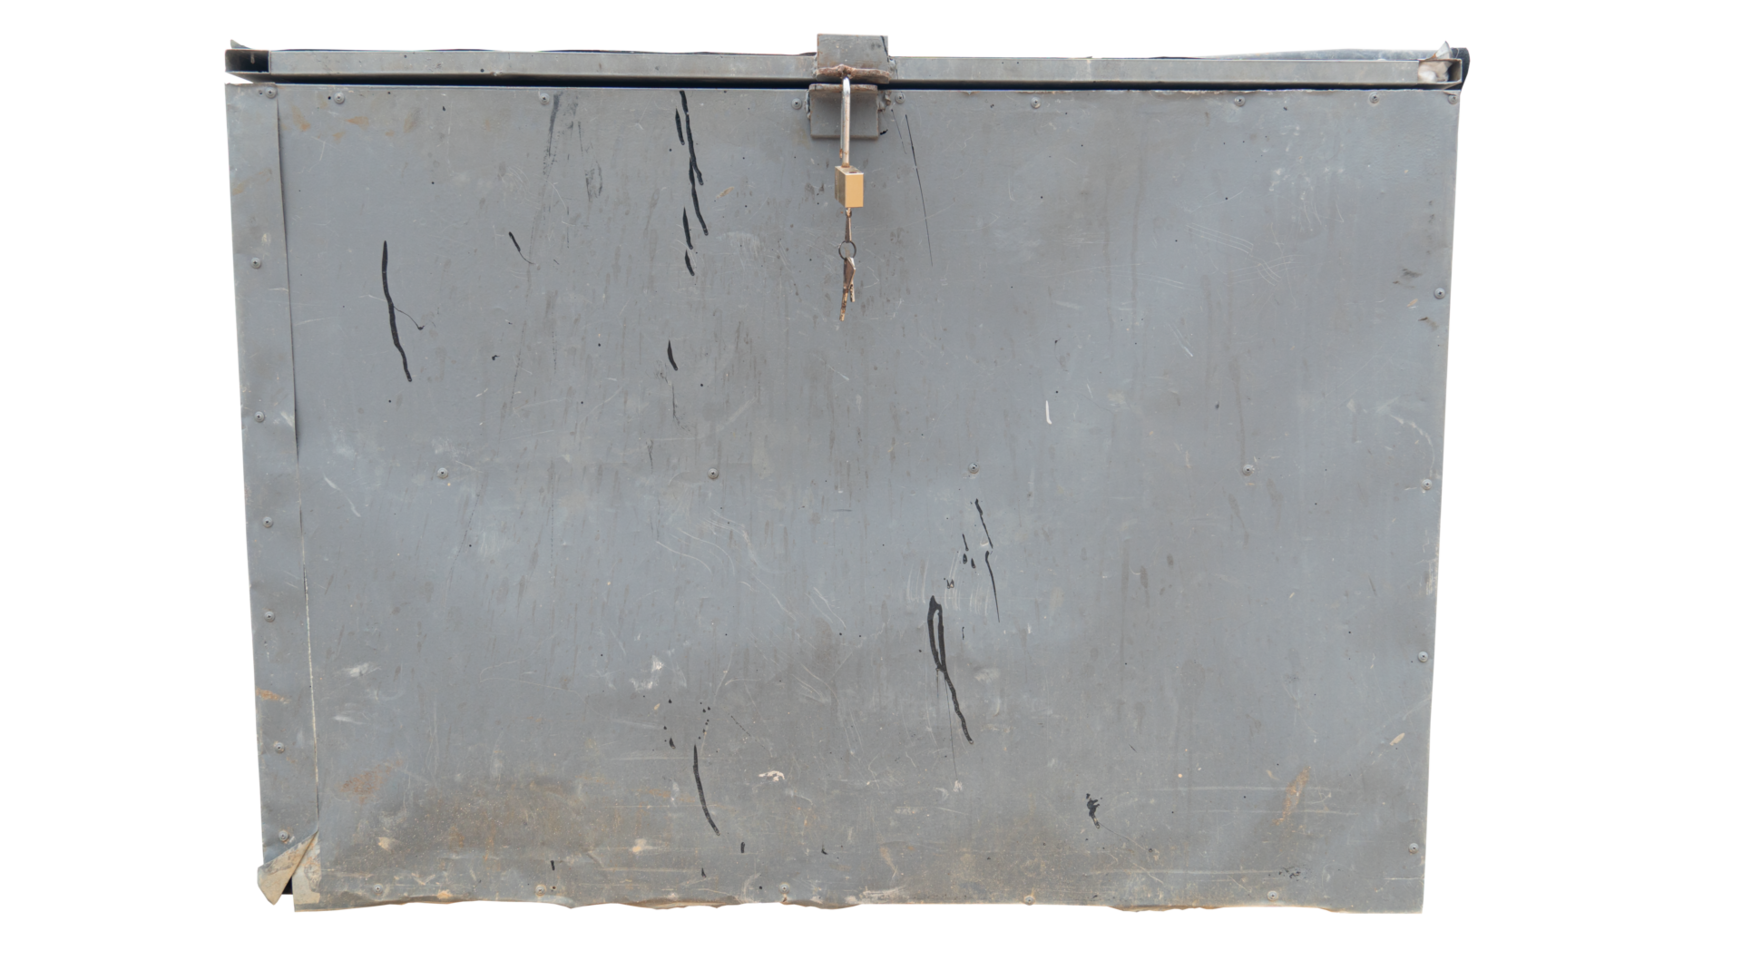 Steel cabinet or steel chest for equipment storage construction equipment that must be placed outside the building. can protect from sun and rain. png